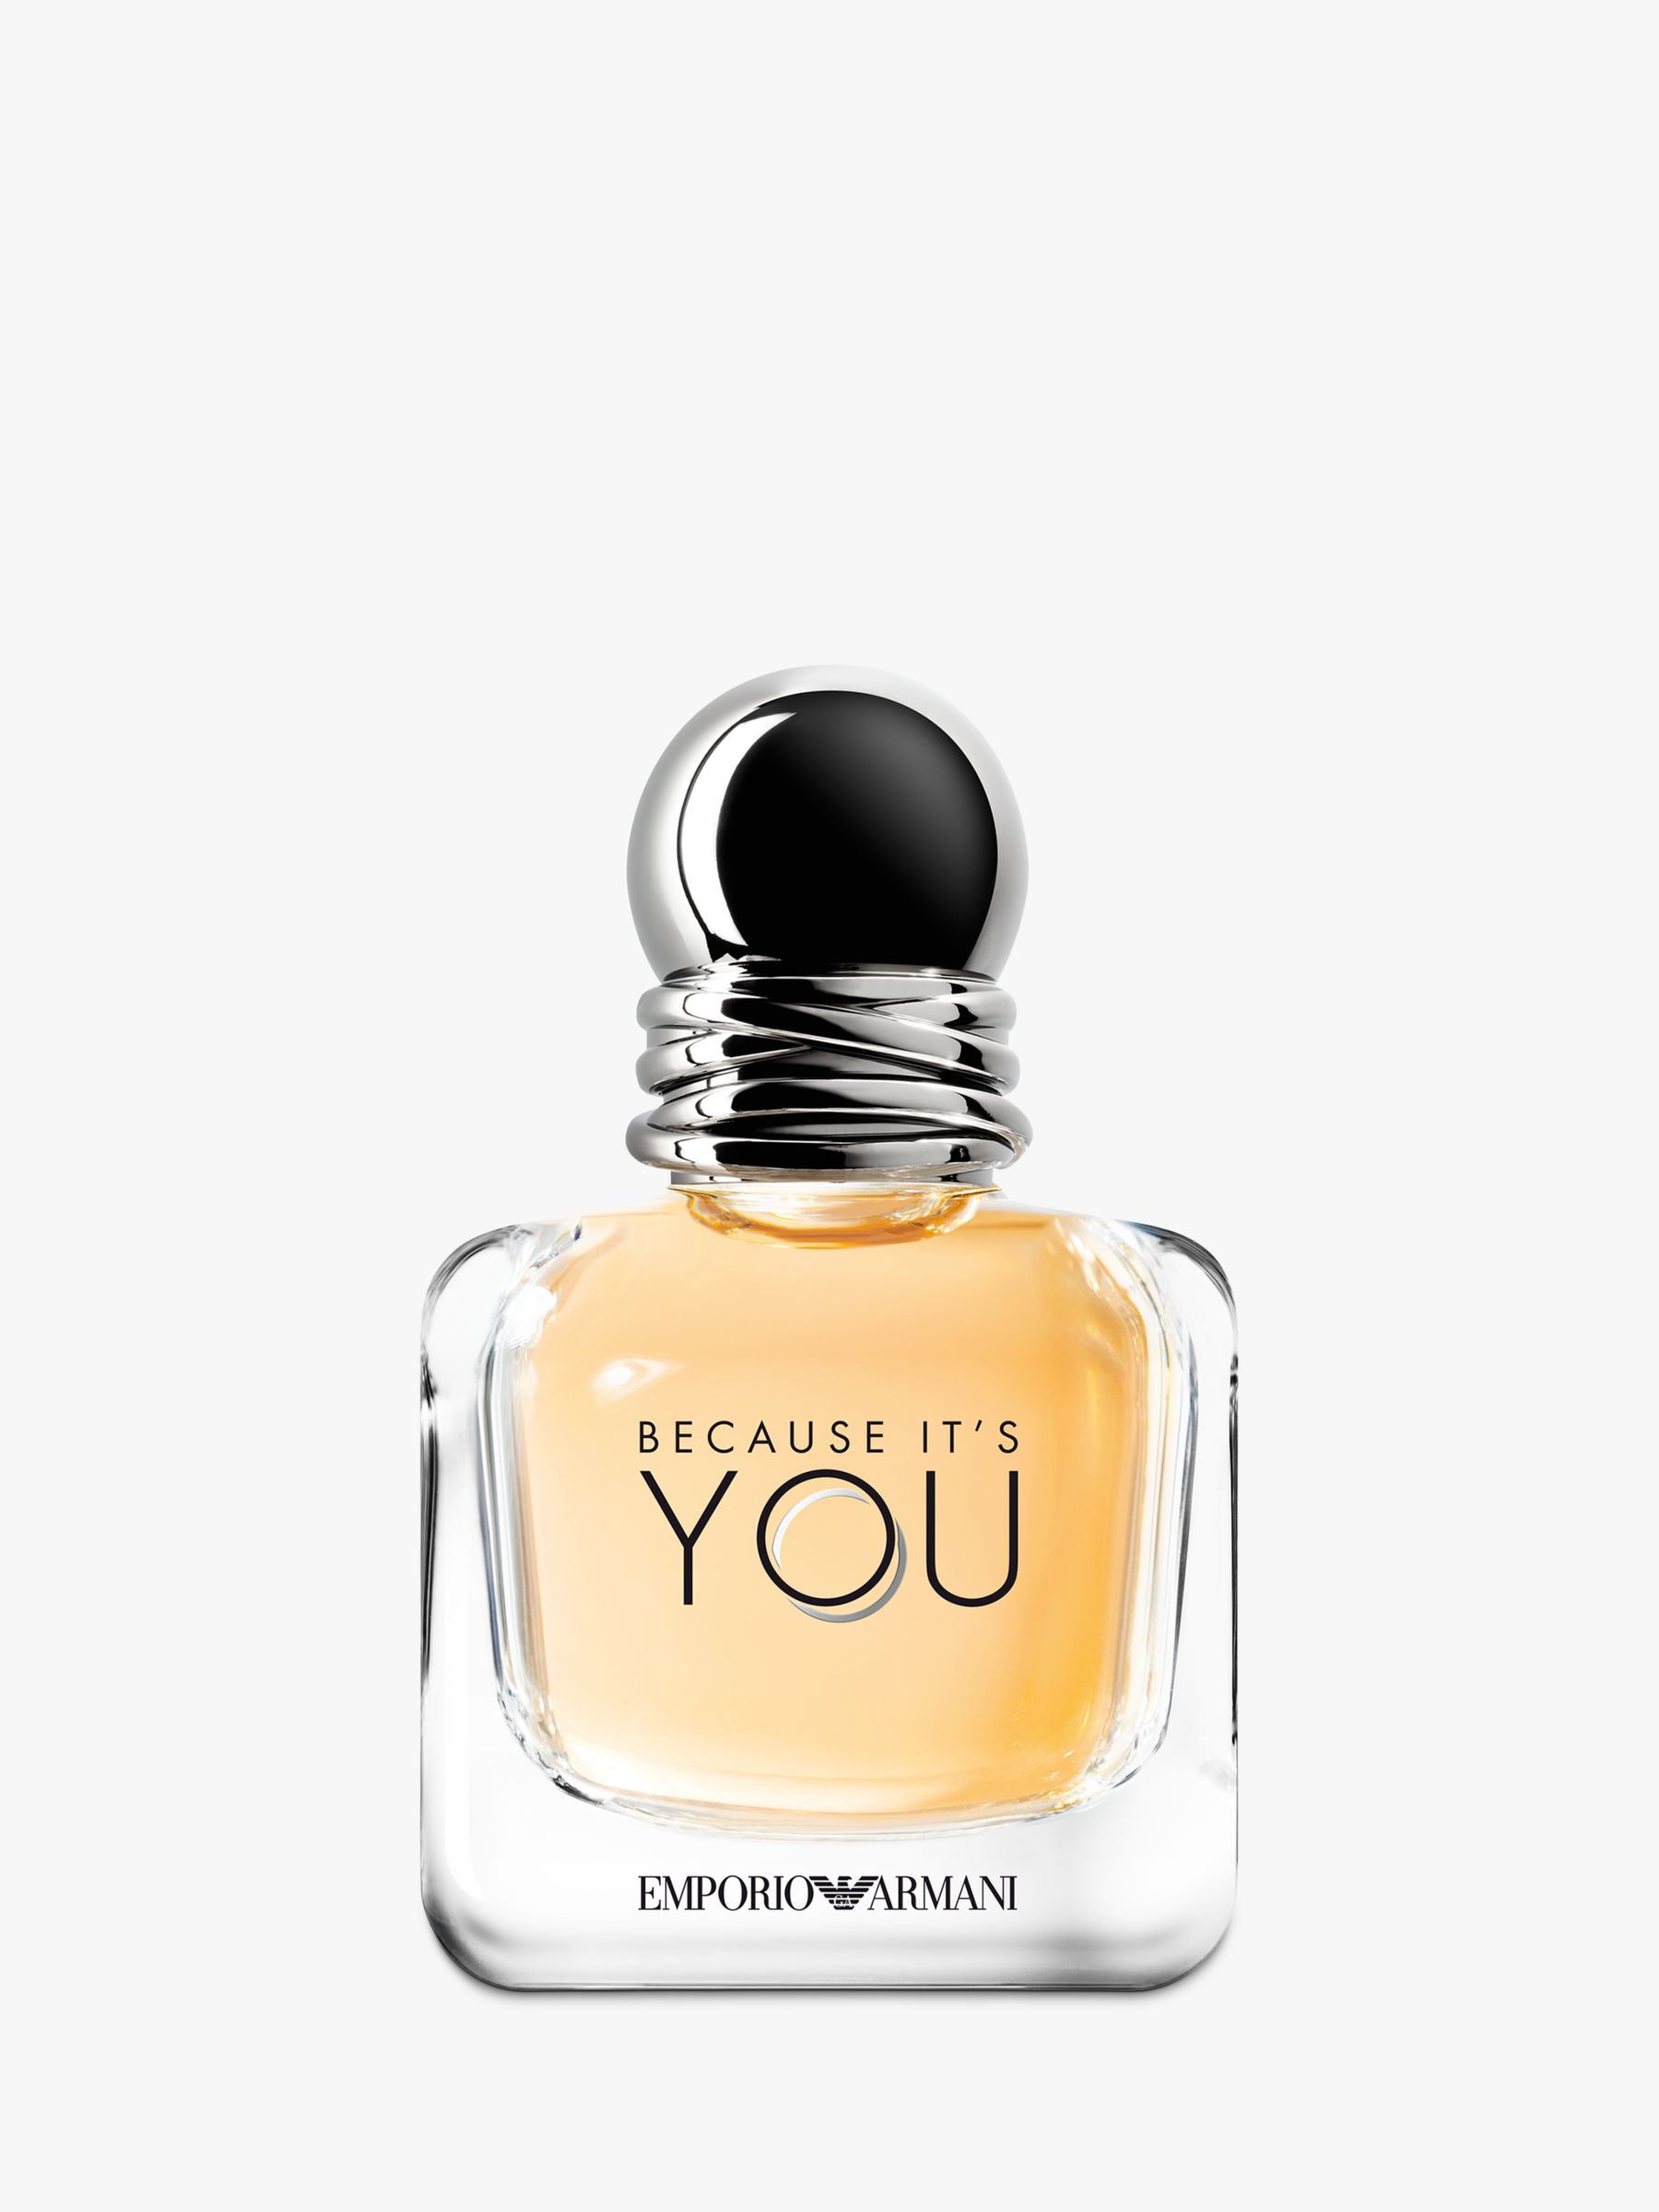 because it's you emporio armani review